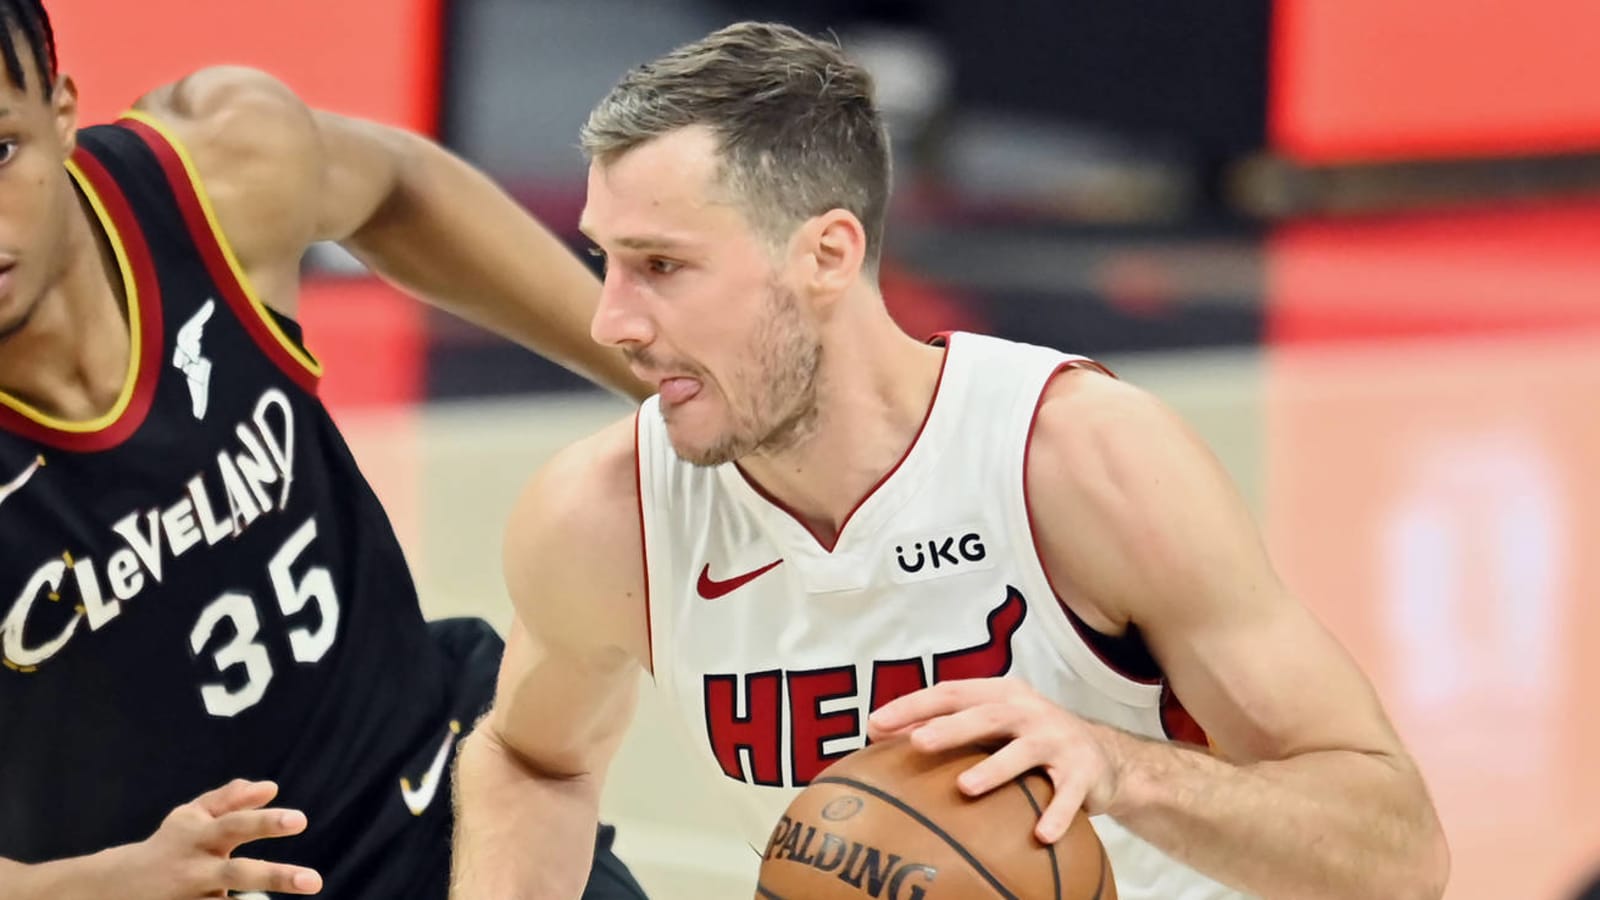 Goran Dragic suggests he does not want to play for Raptors